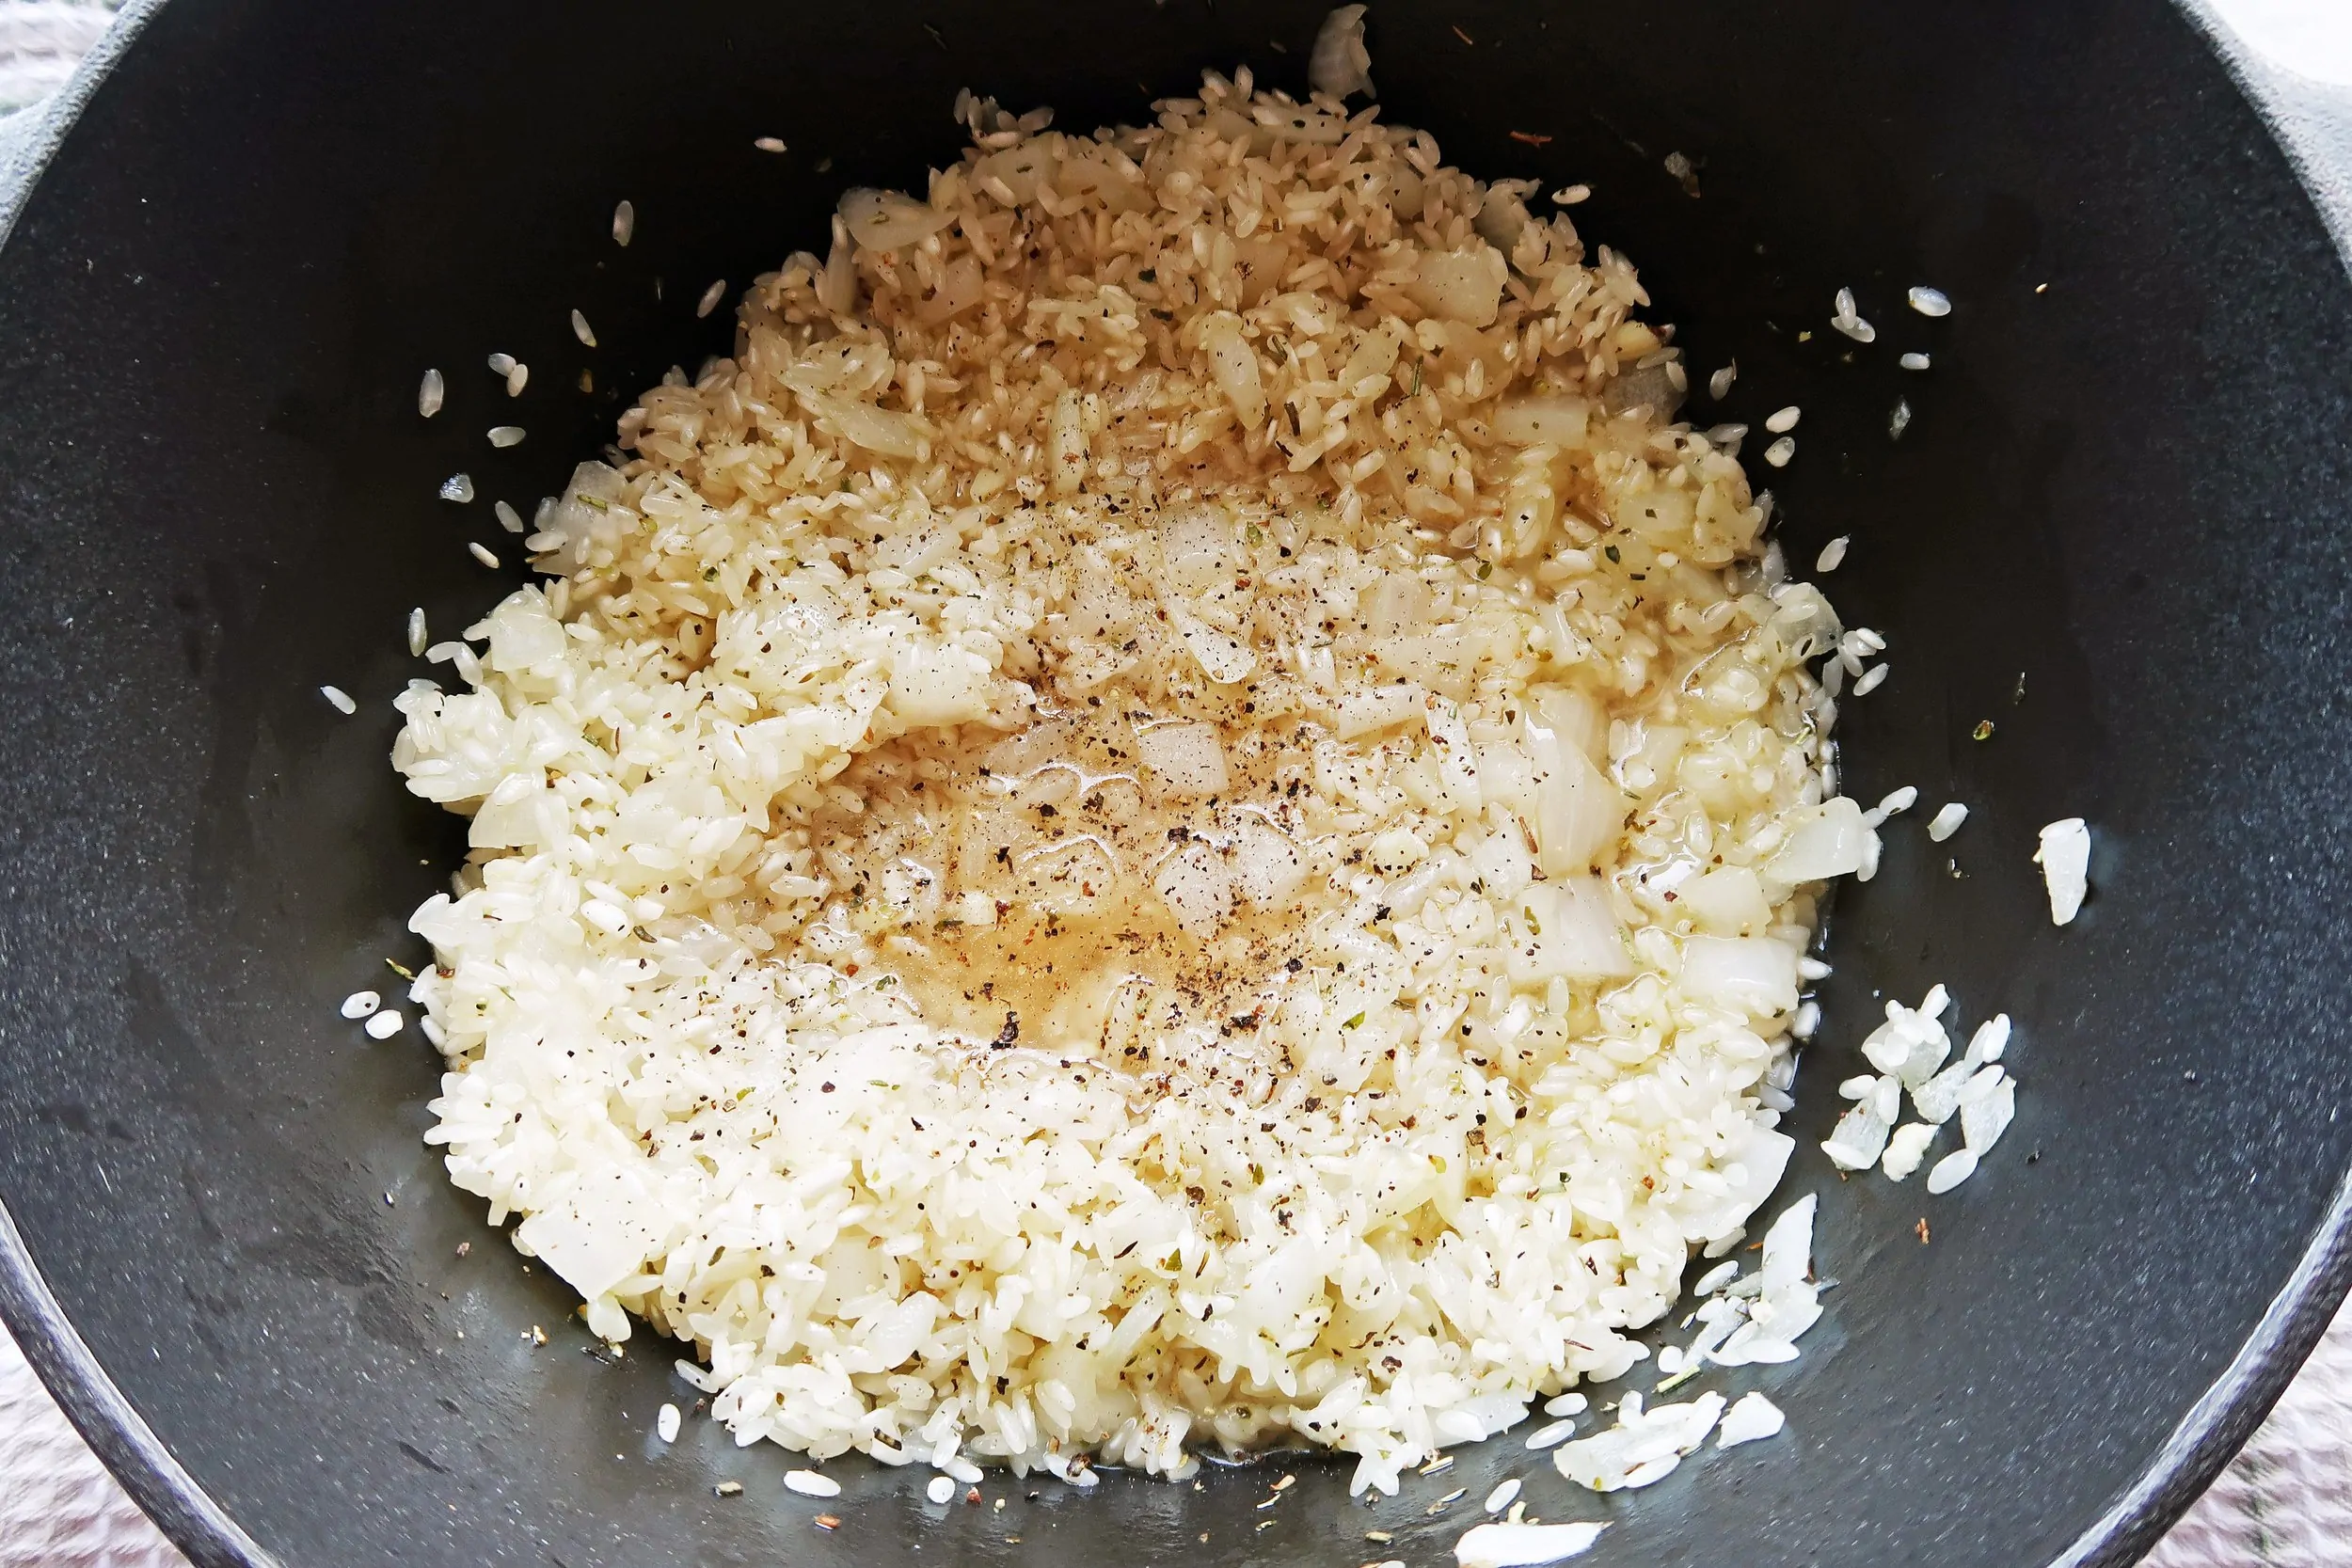 A Dutch oven containing arborio rice. onions, garlic, herbs,and white wine.